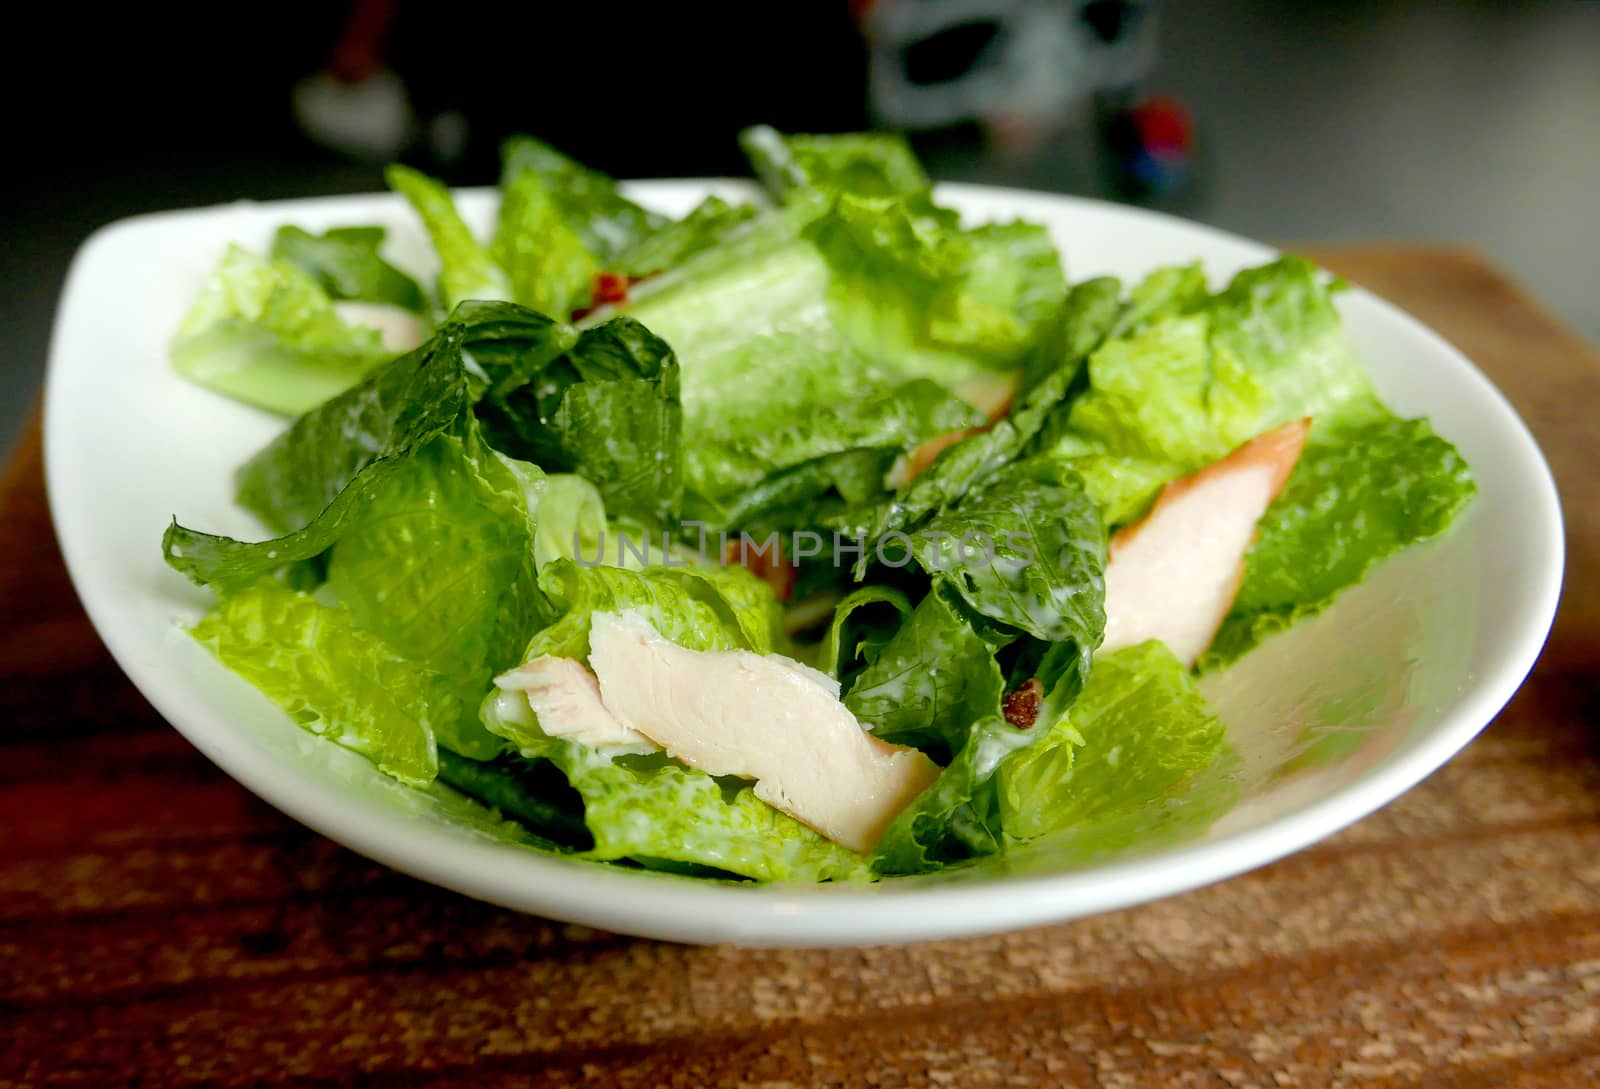 Chicken, meat, lettuce delicious ceasar salad in the white dish